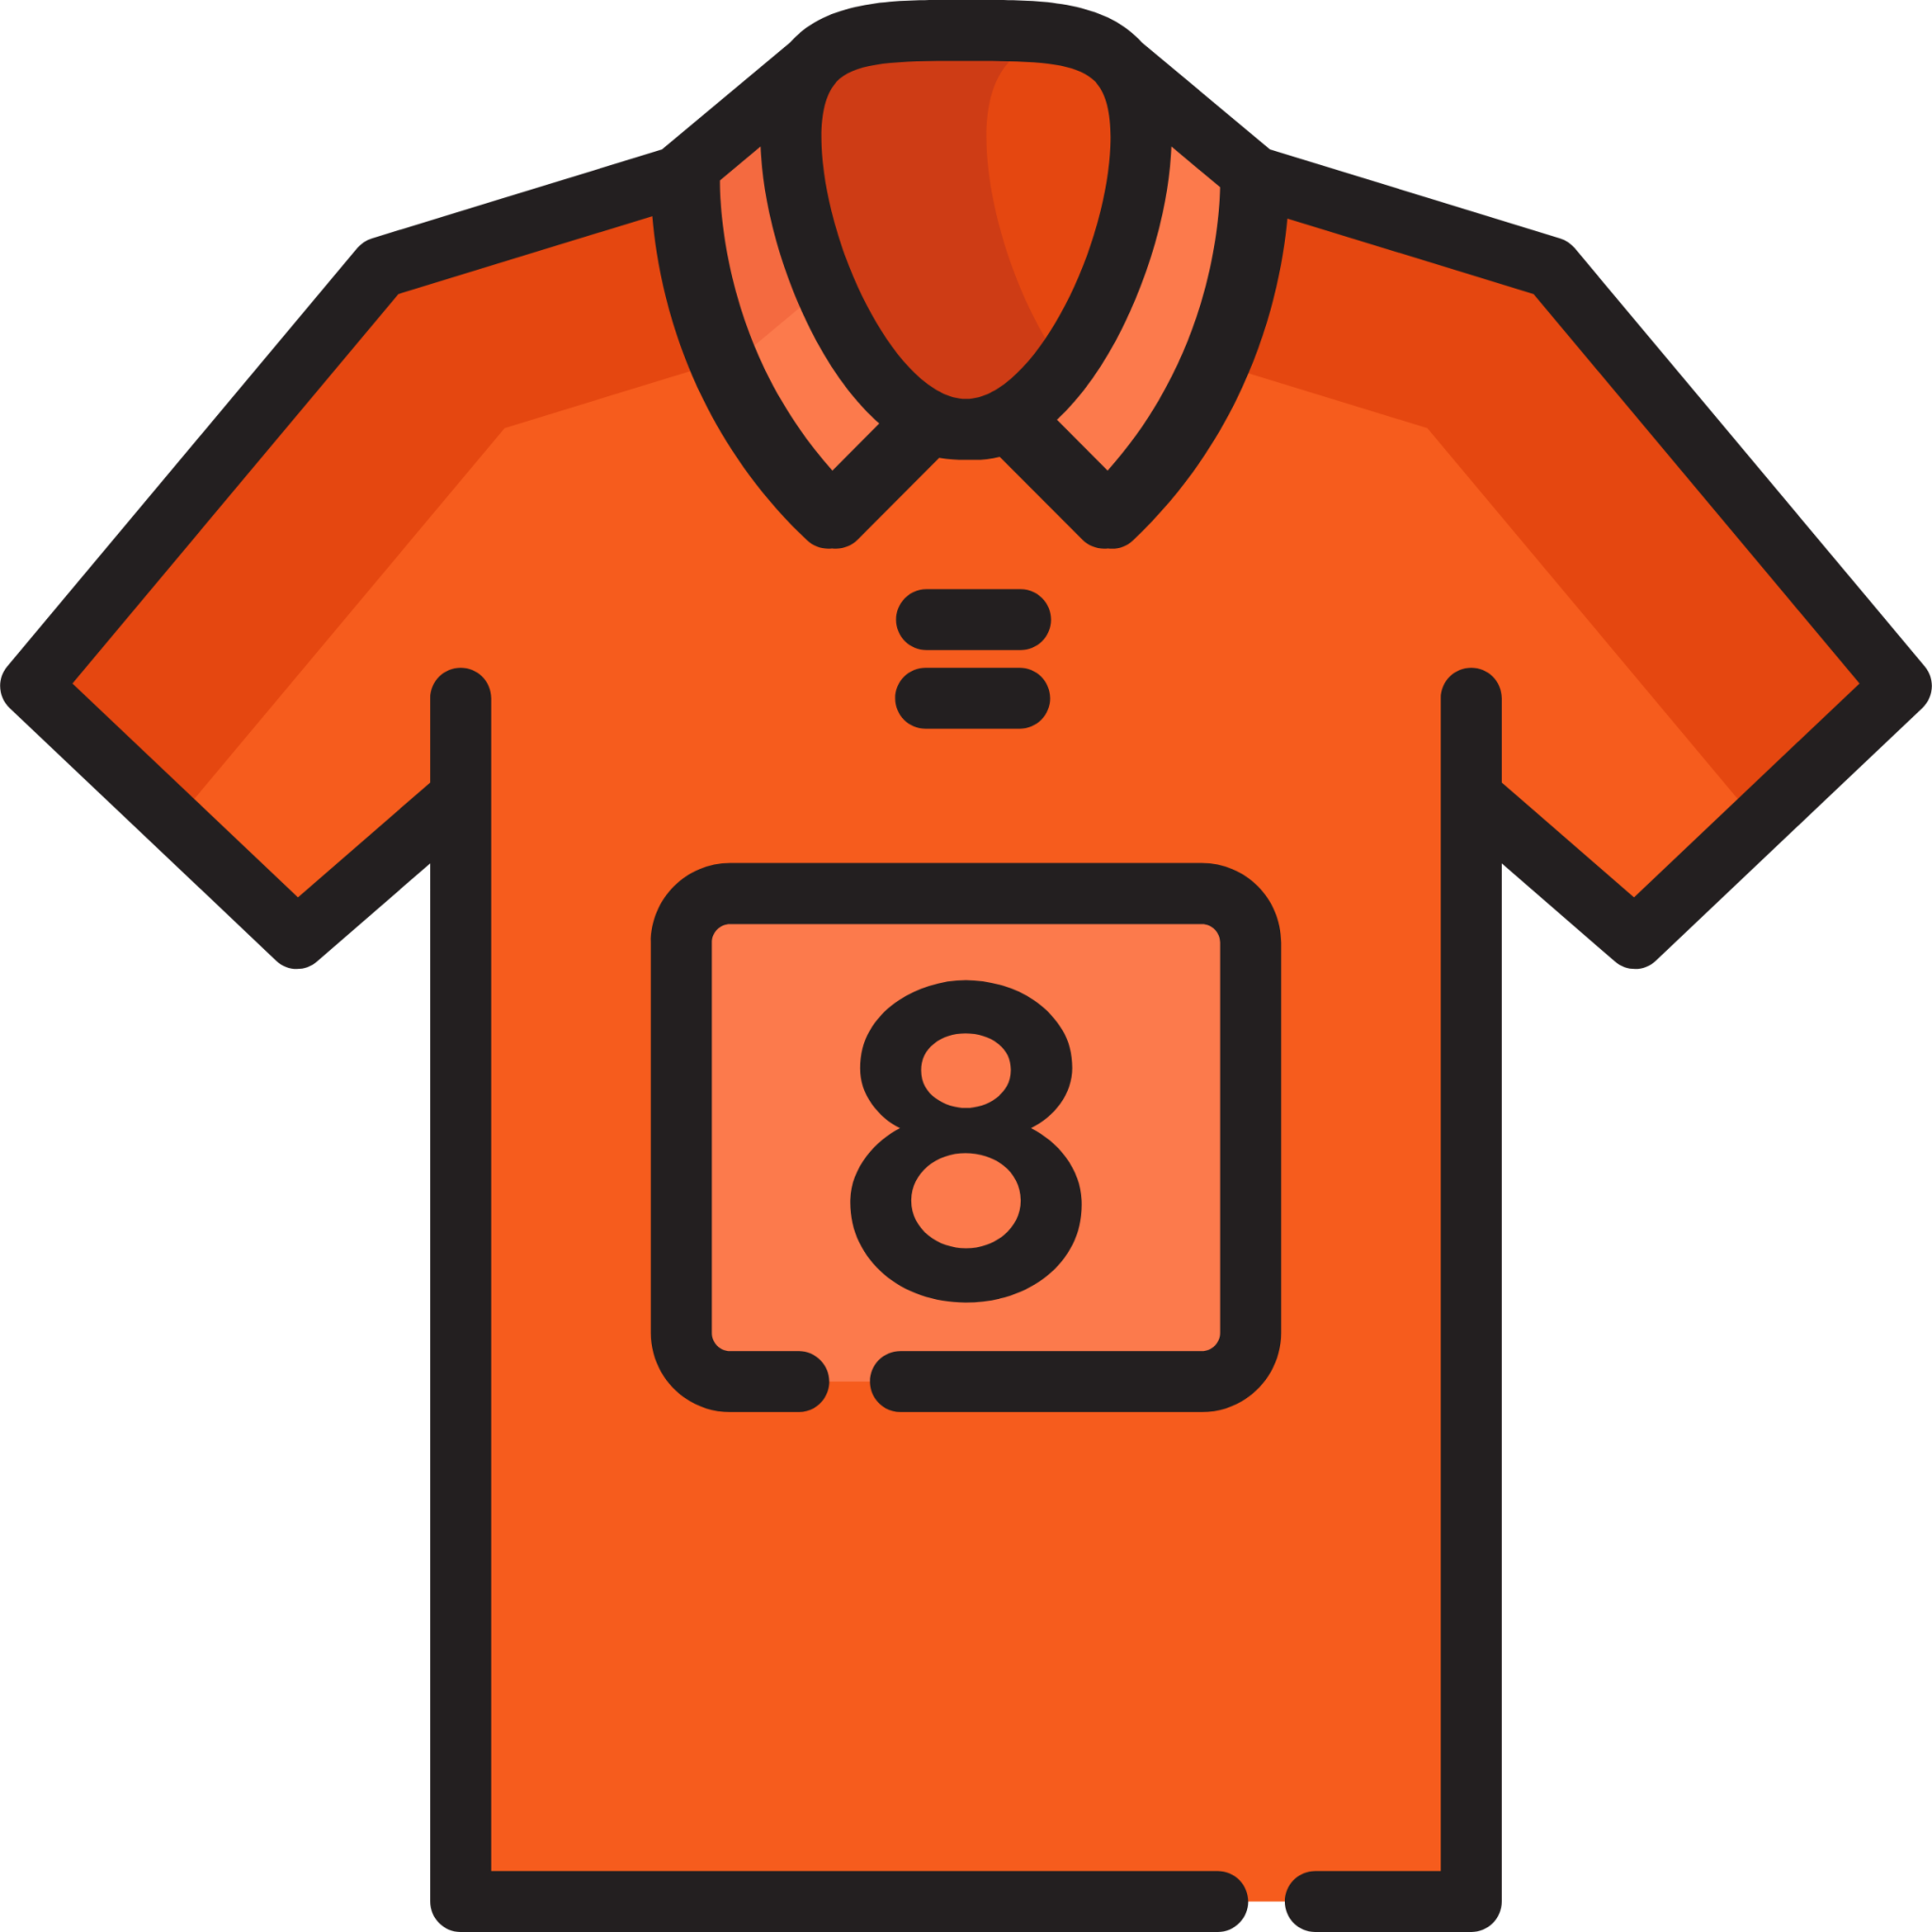 Football jersey - Free sports icons